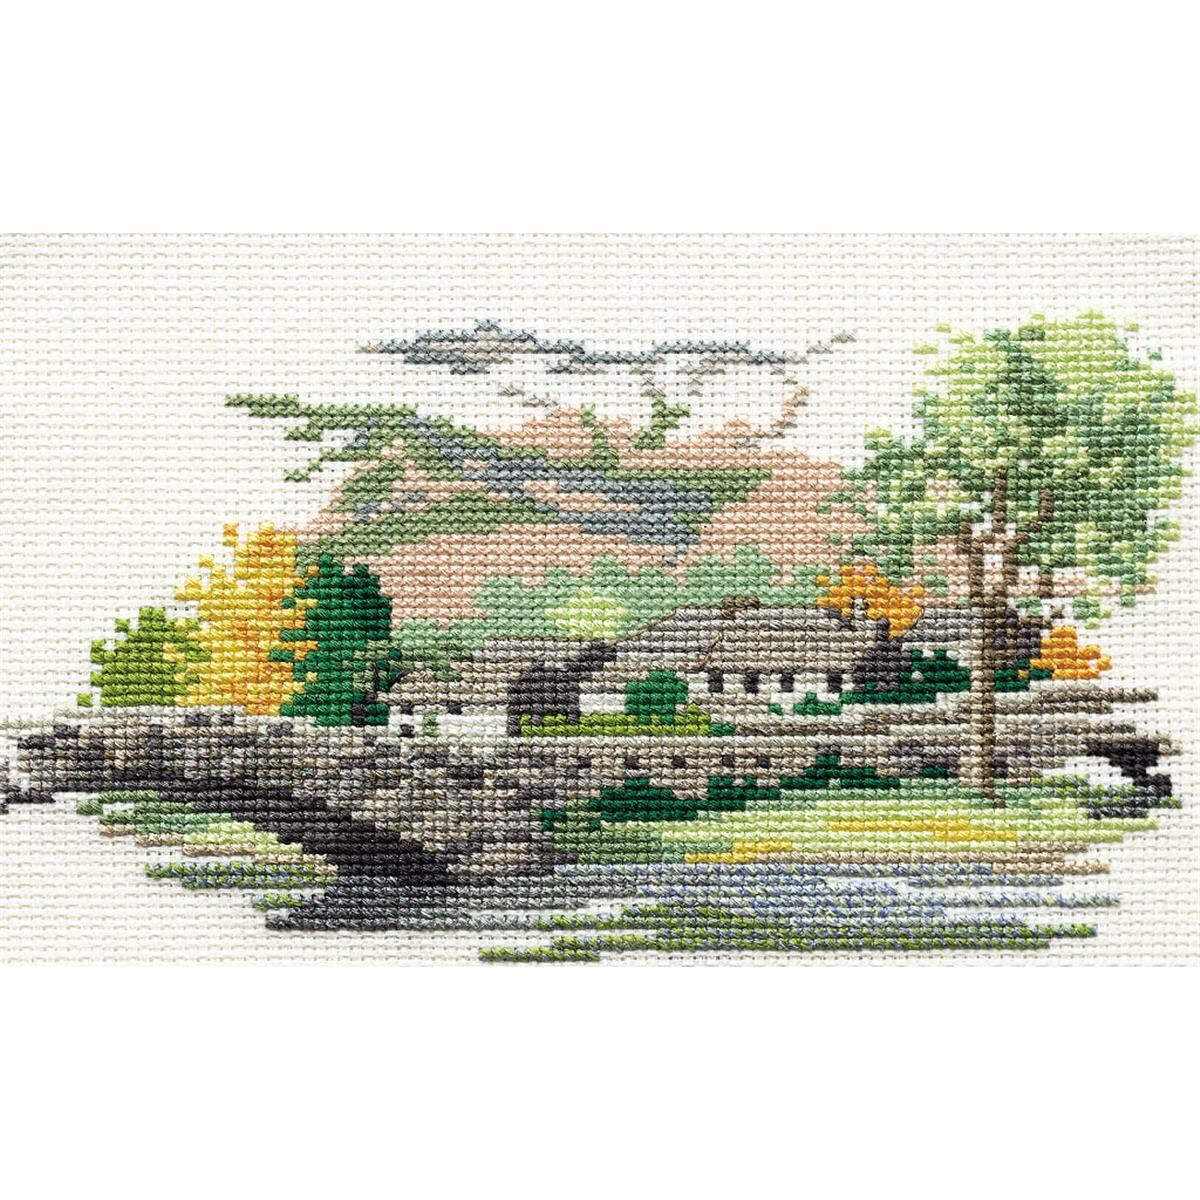 A cross stitch embroidery pack from Bothy Threads depicts...